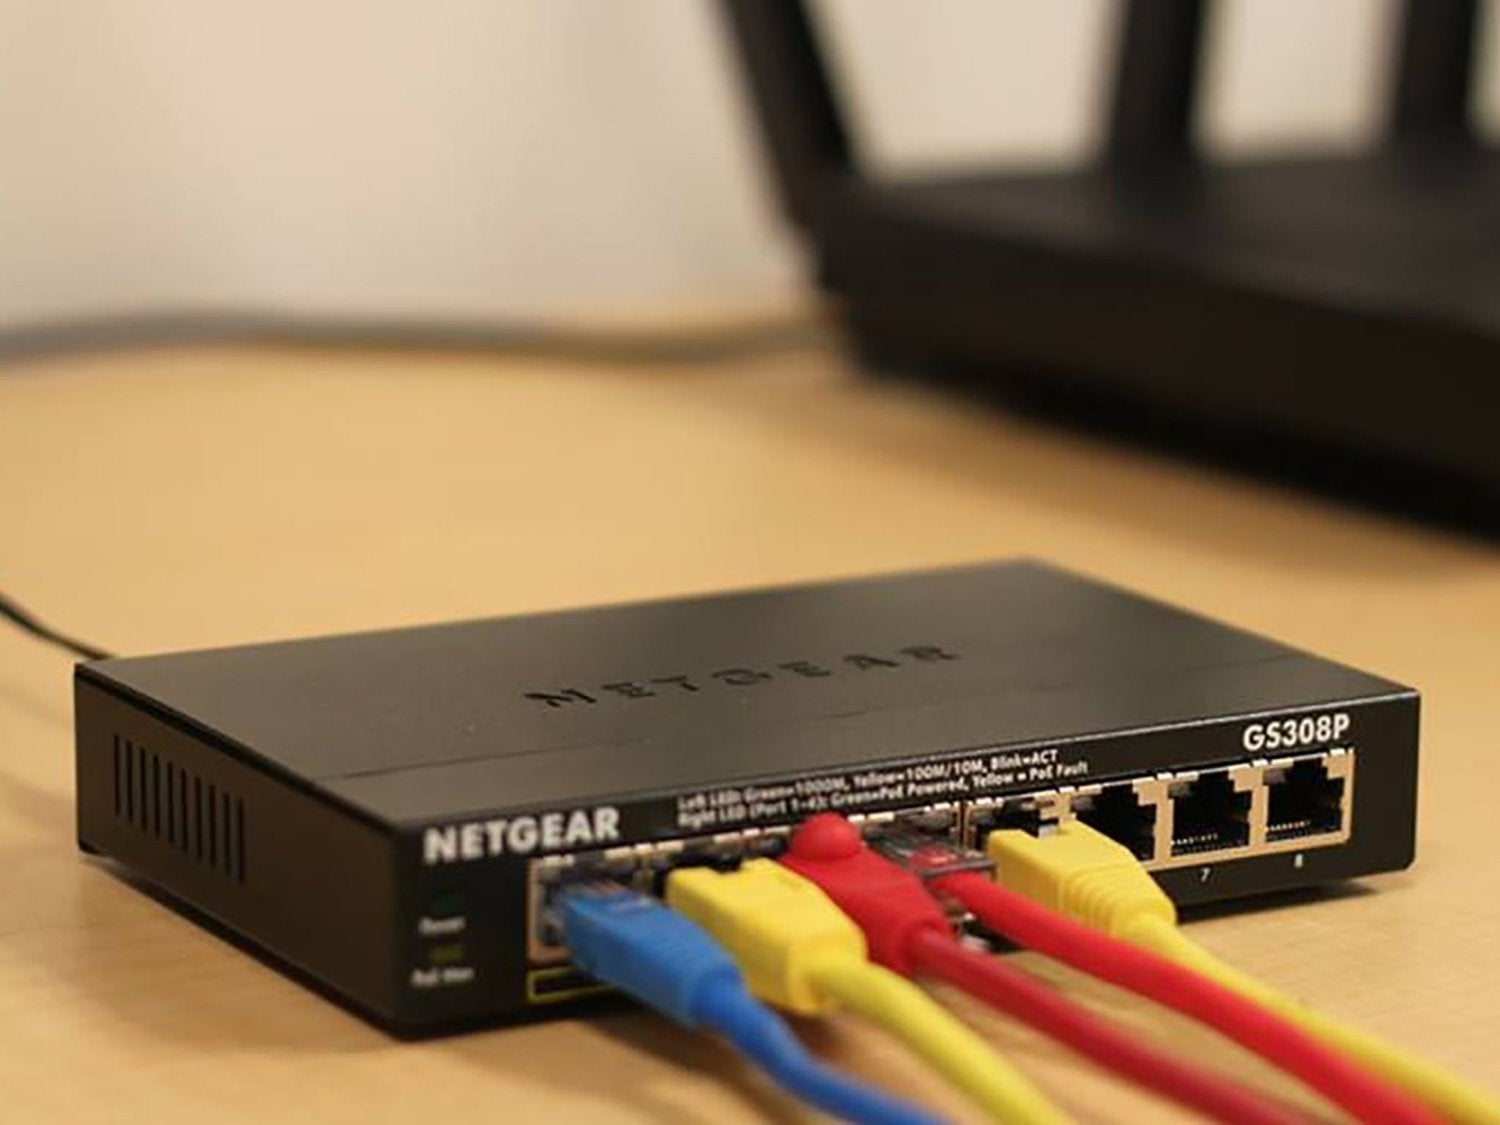 A Netgear router with blue, yellow, and red wires, including an Ethernet connection.